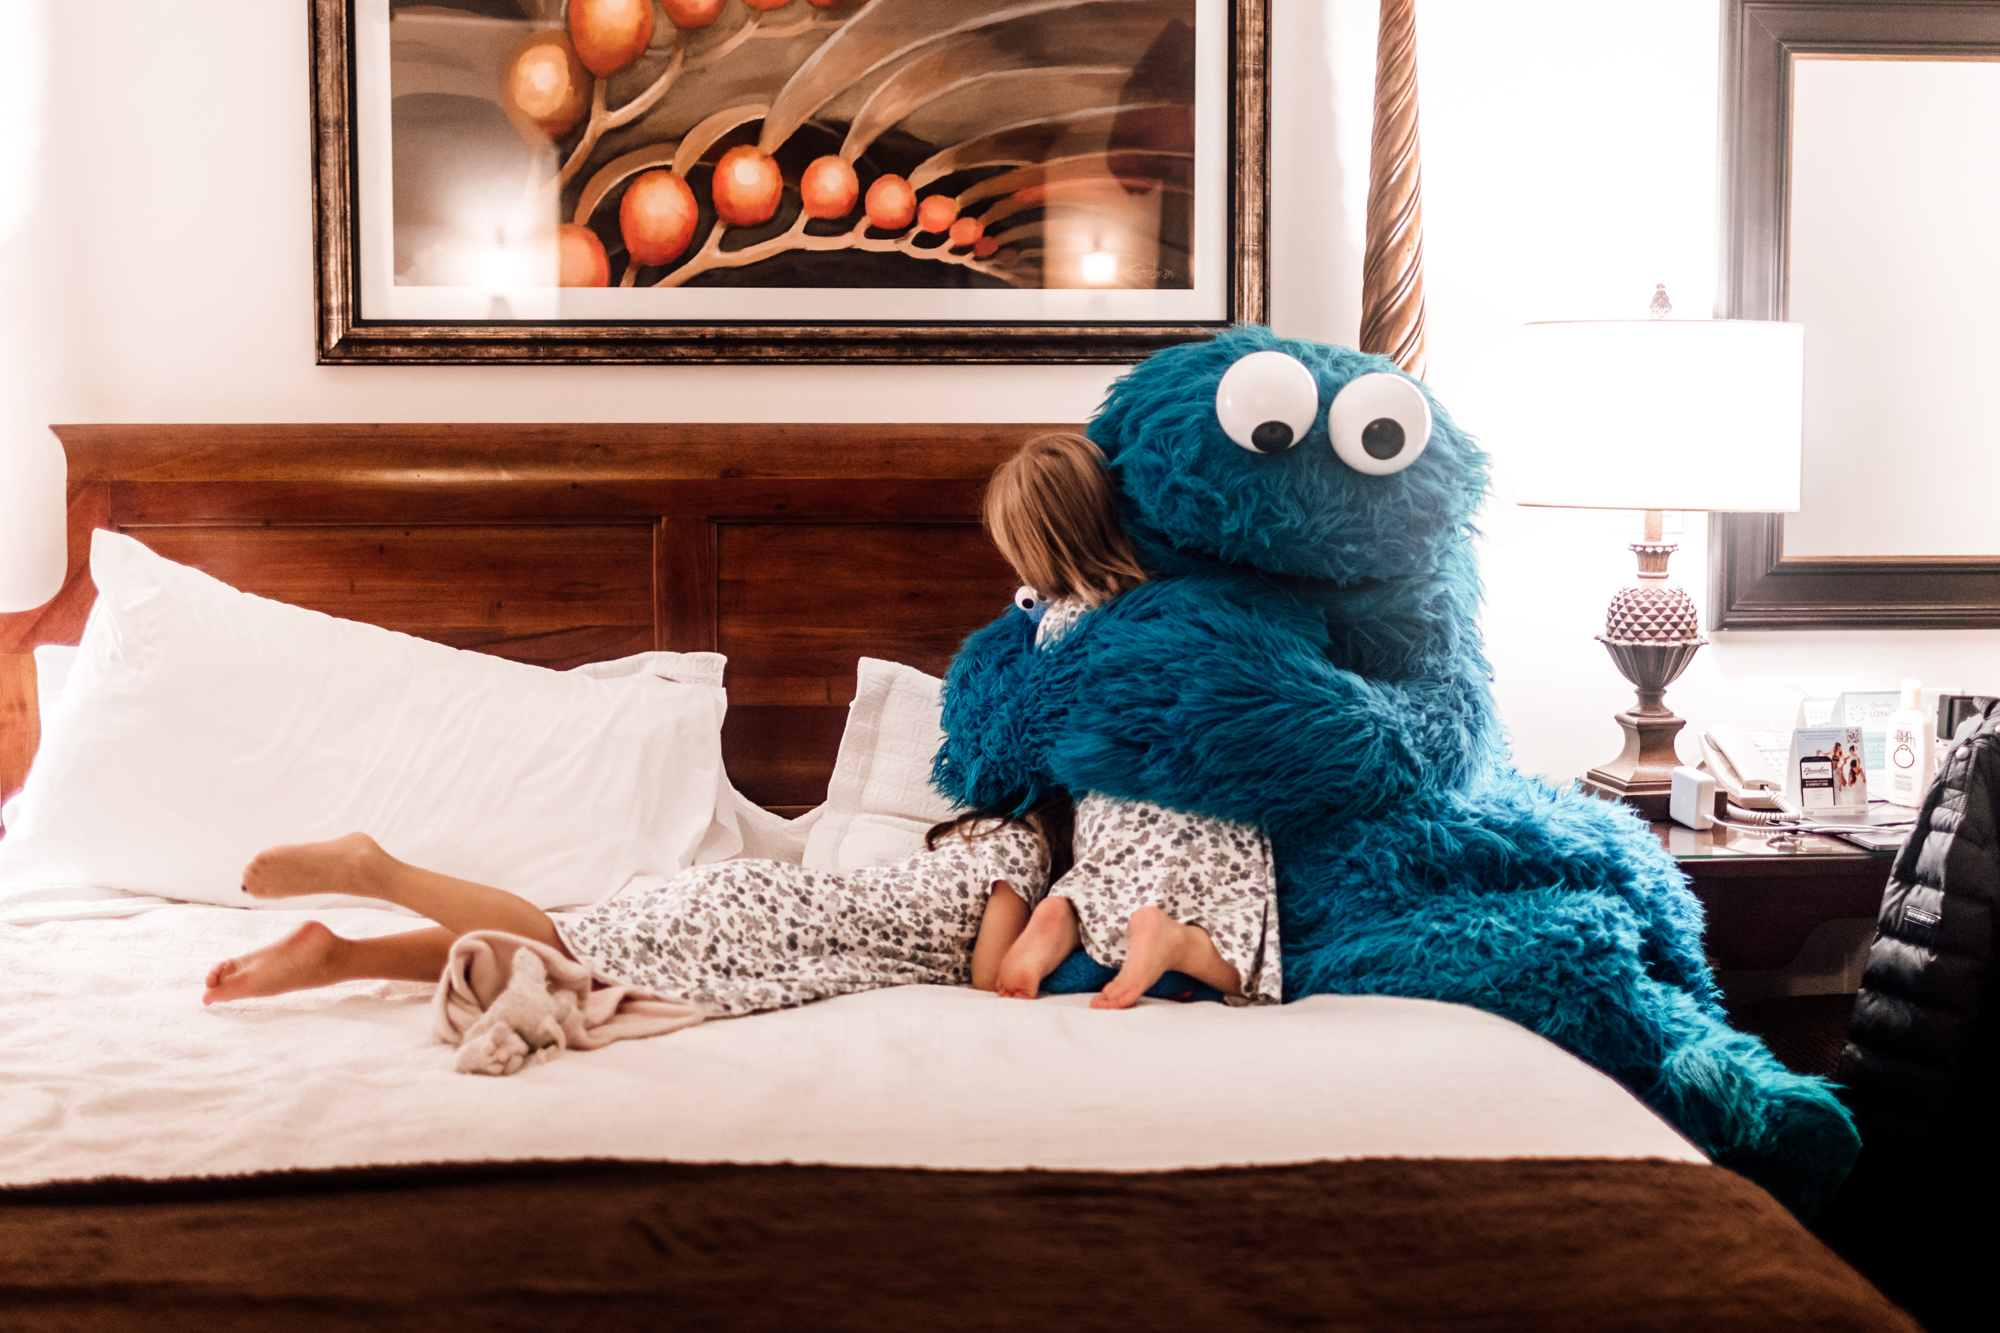 Beaches Turks and Caicos Review: Cookie Monster Bedtime